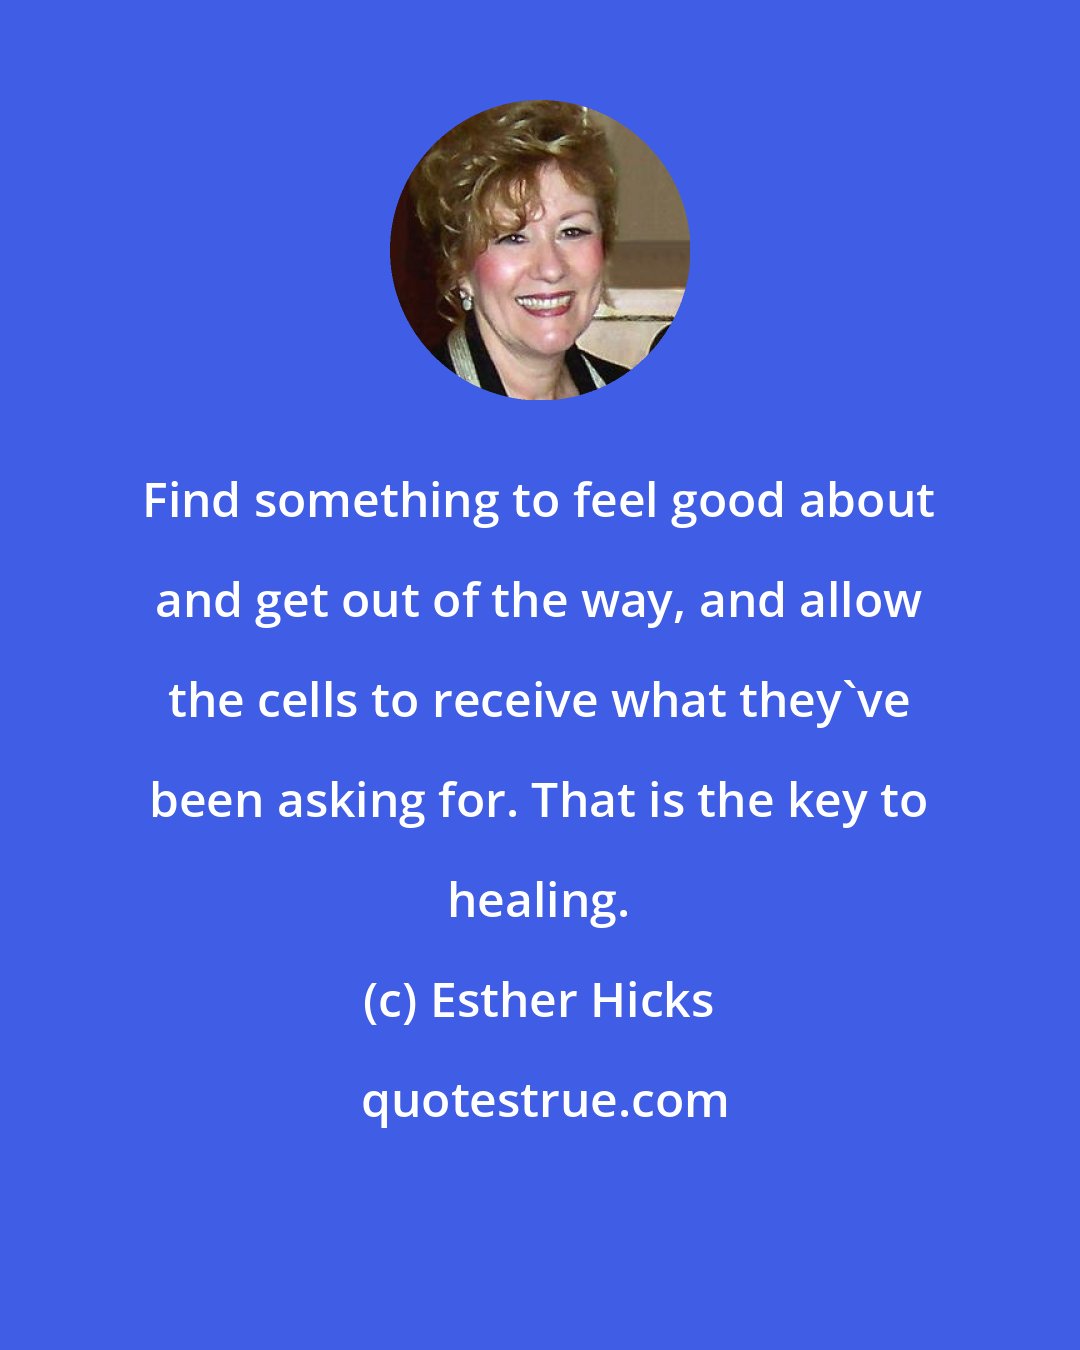 Esther Hicks: Find something to feel good about and get out of the way, and allow the cells to receive what they've been asking for. That is the key to healing.